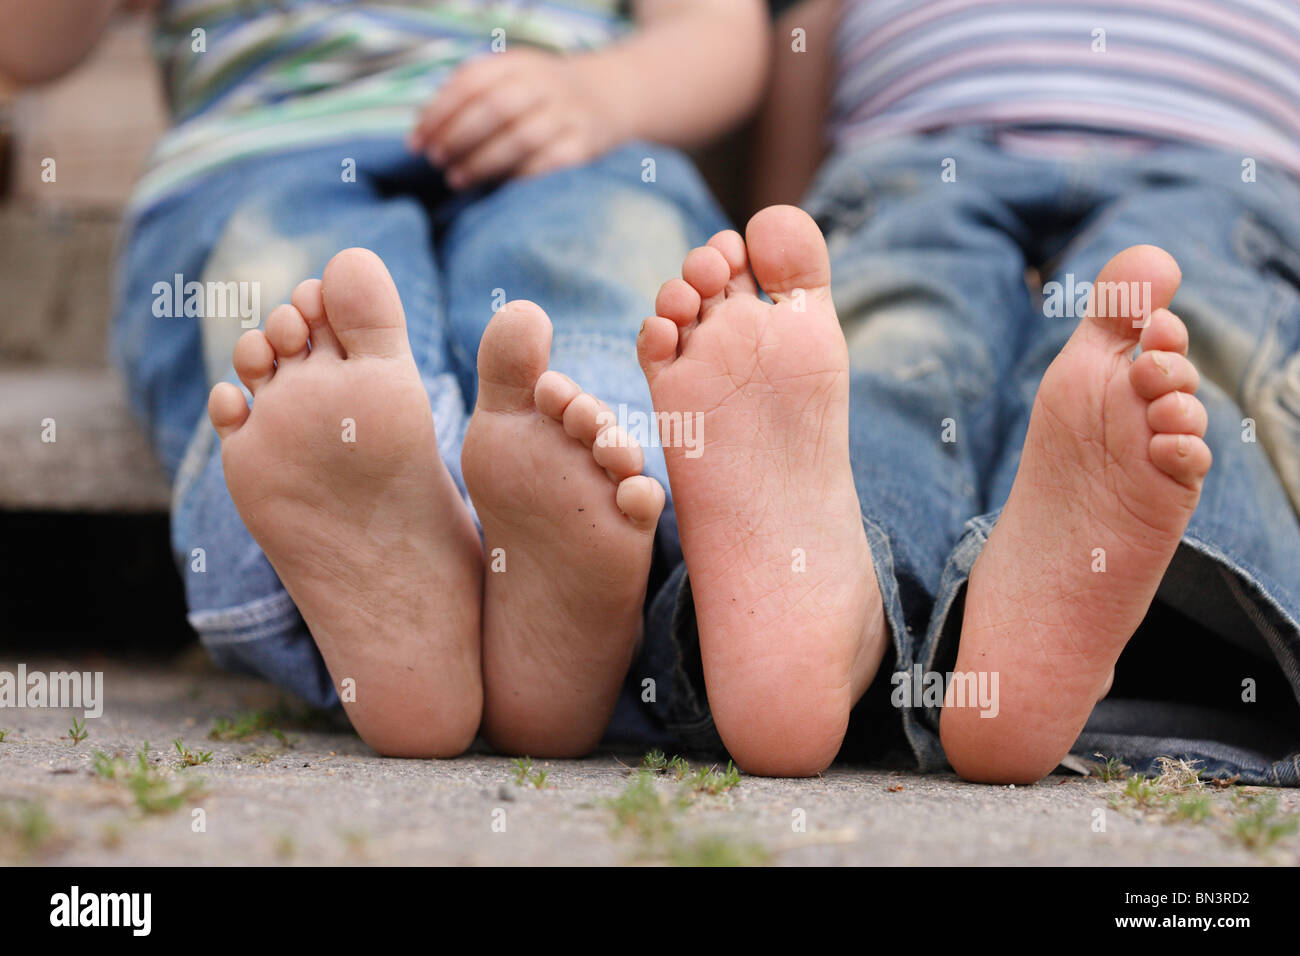 dirty feet of a child from below, Germany Stock Photo